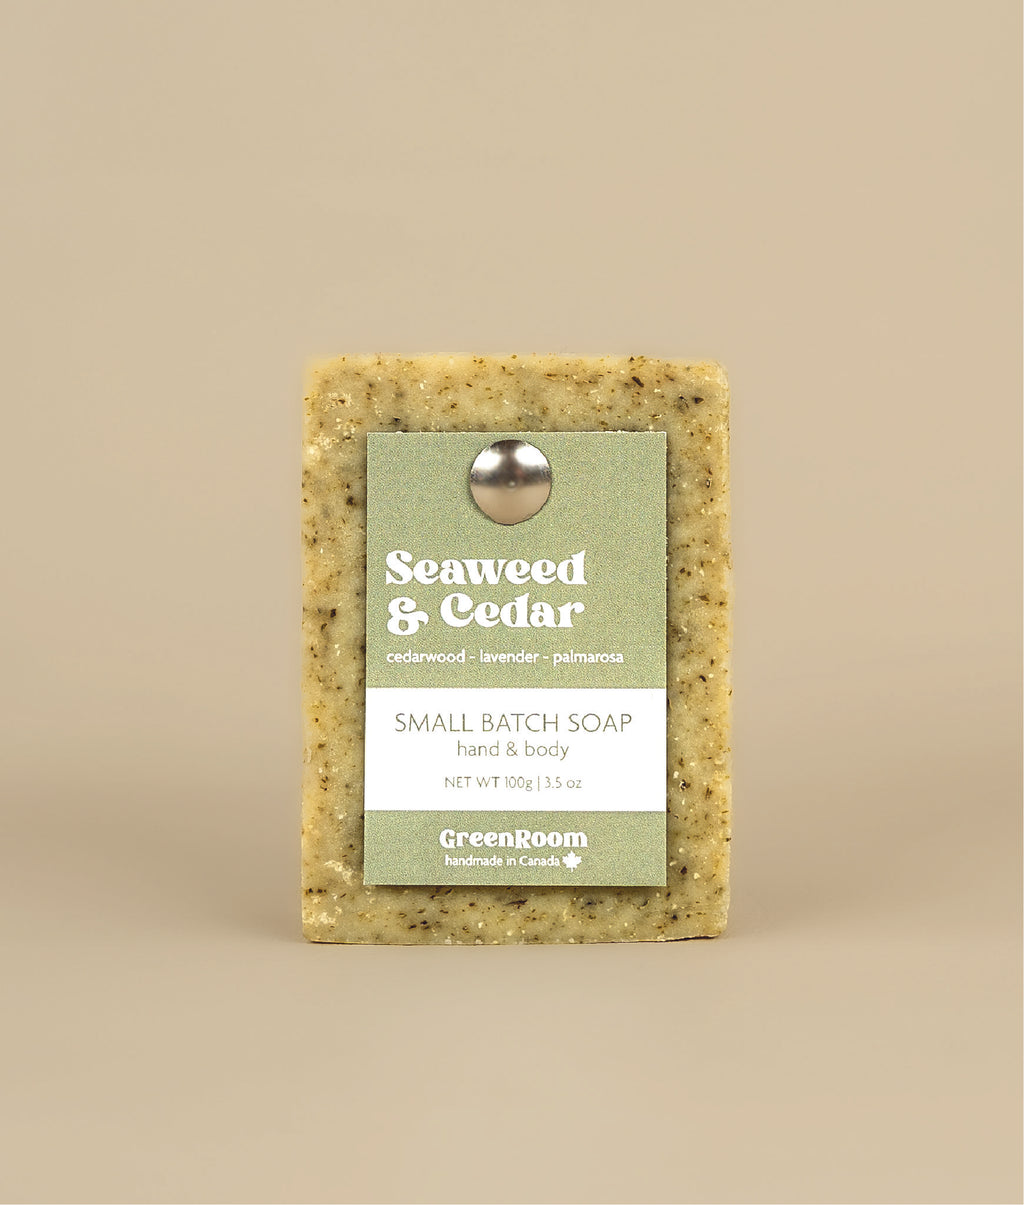 Seaweed and cedar soap with green and white recycled paper tag held up by metal push pin